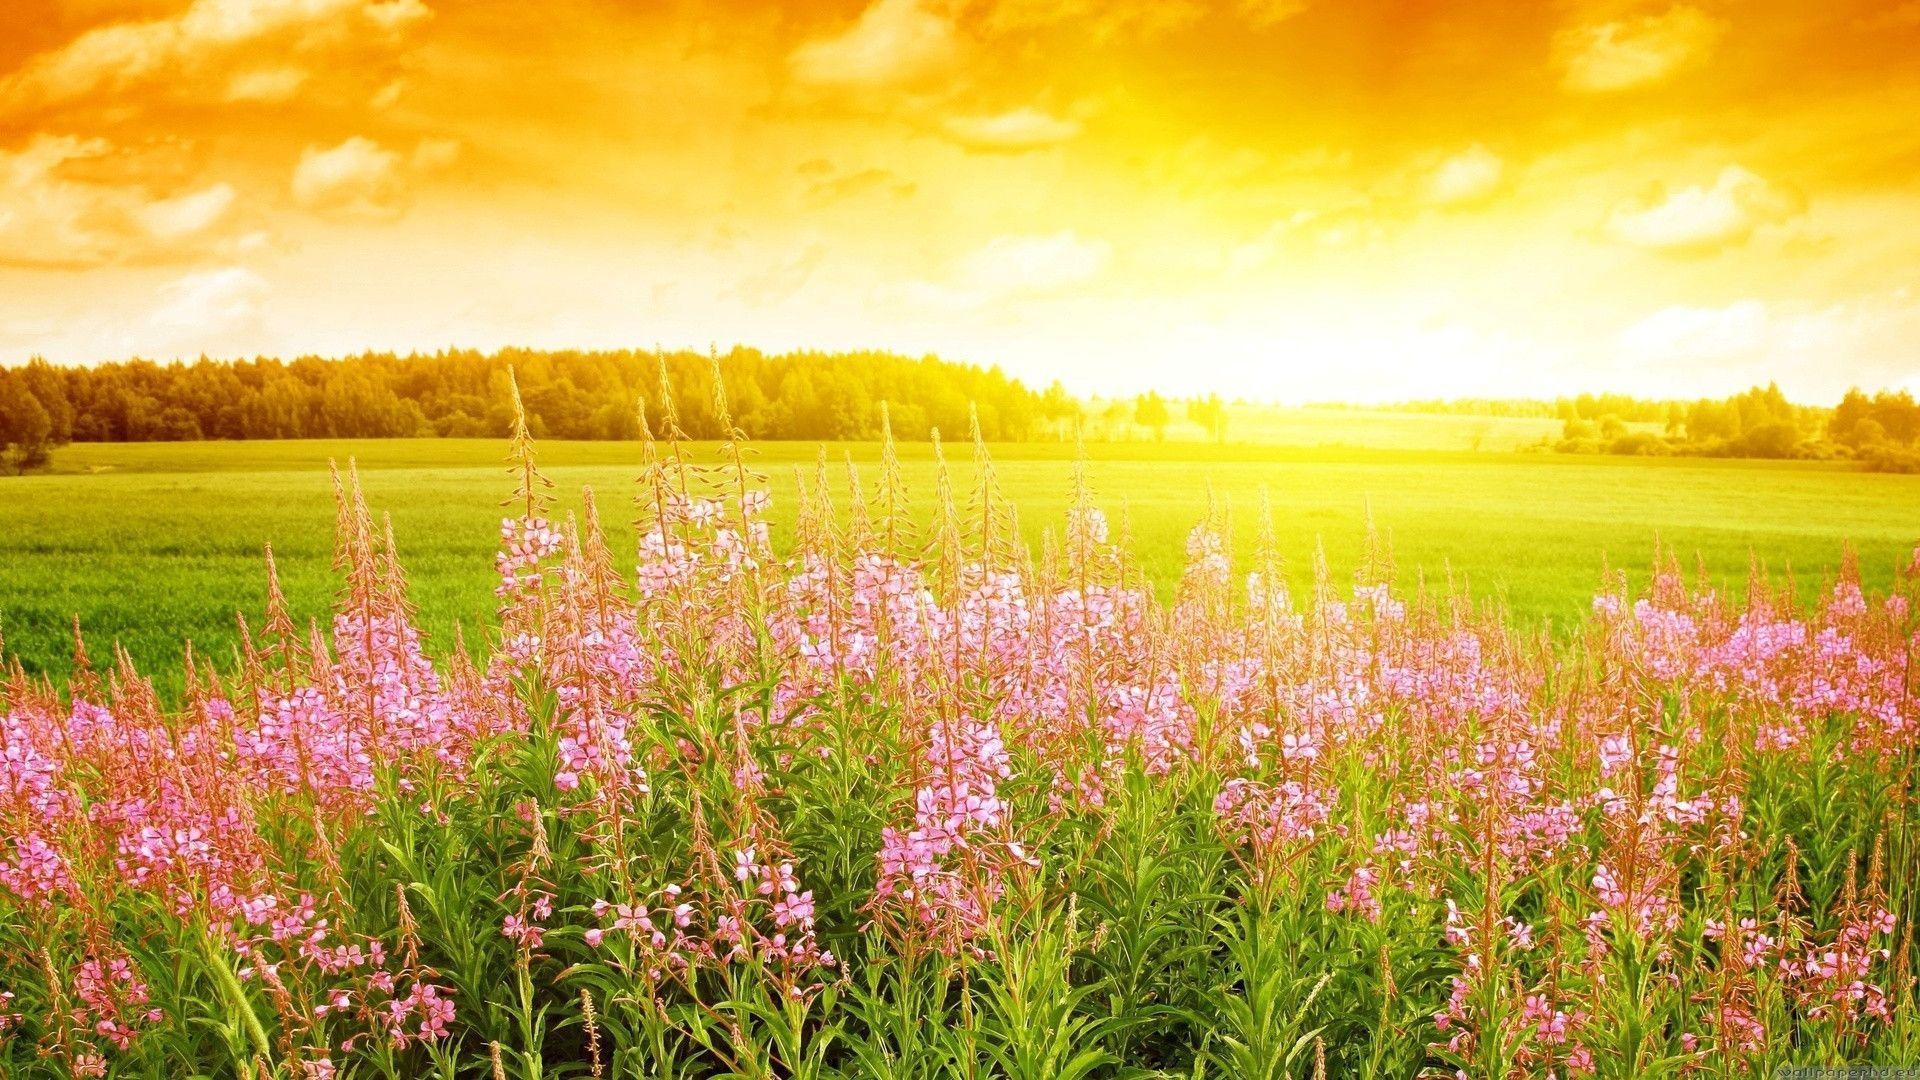 Field Of Flowers Wallpapers - Wallpaper Cave